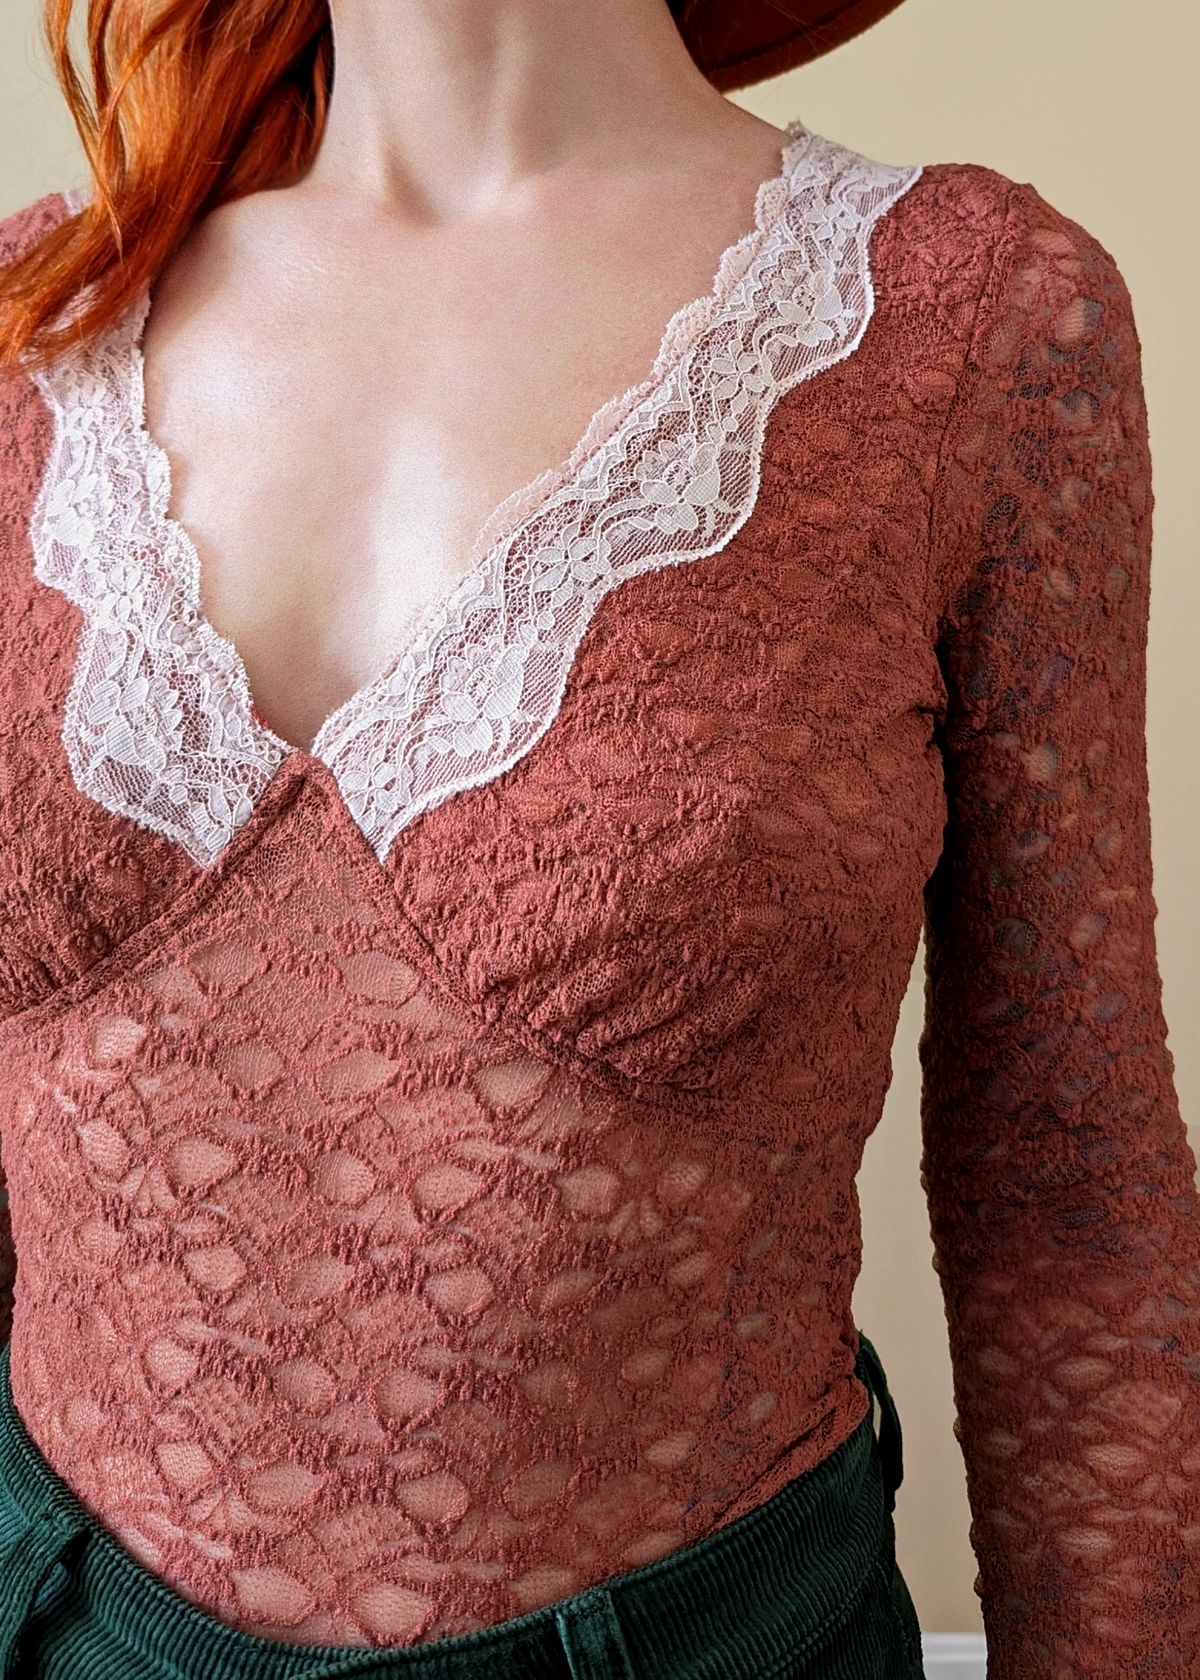 90s inspired withered rose netted lace top with deep v neckline accented with pale pink lace trim. Long fluted sleeves. Fully lined at bust, unlined through the rest. By Motel Rocks.